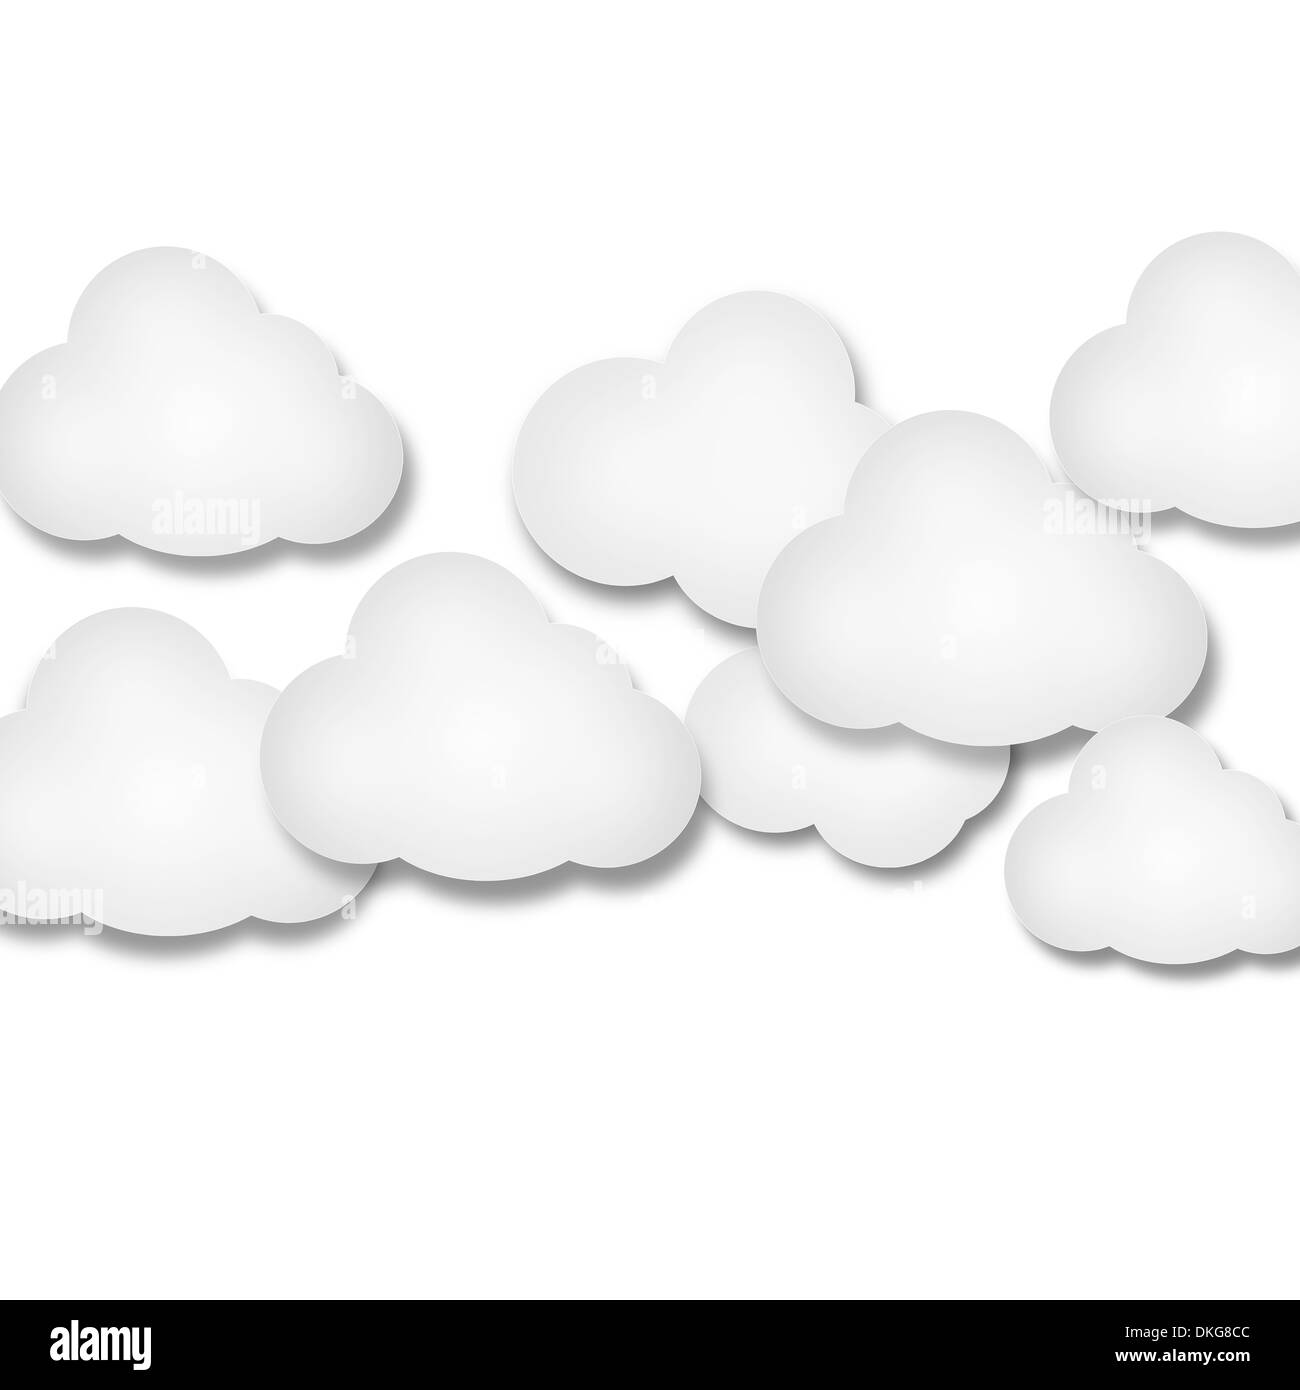 Illustration of white paper clouds over white background Stock Photo ...